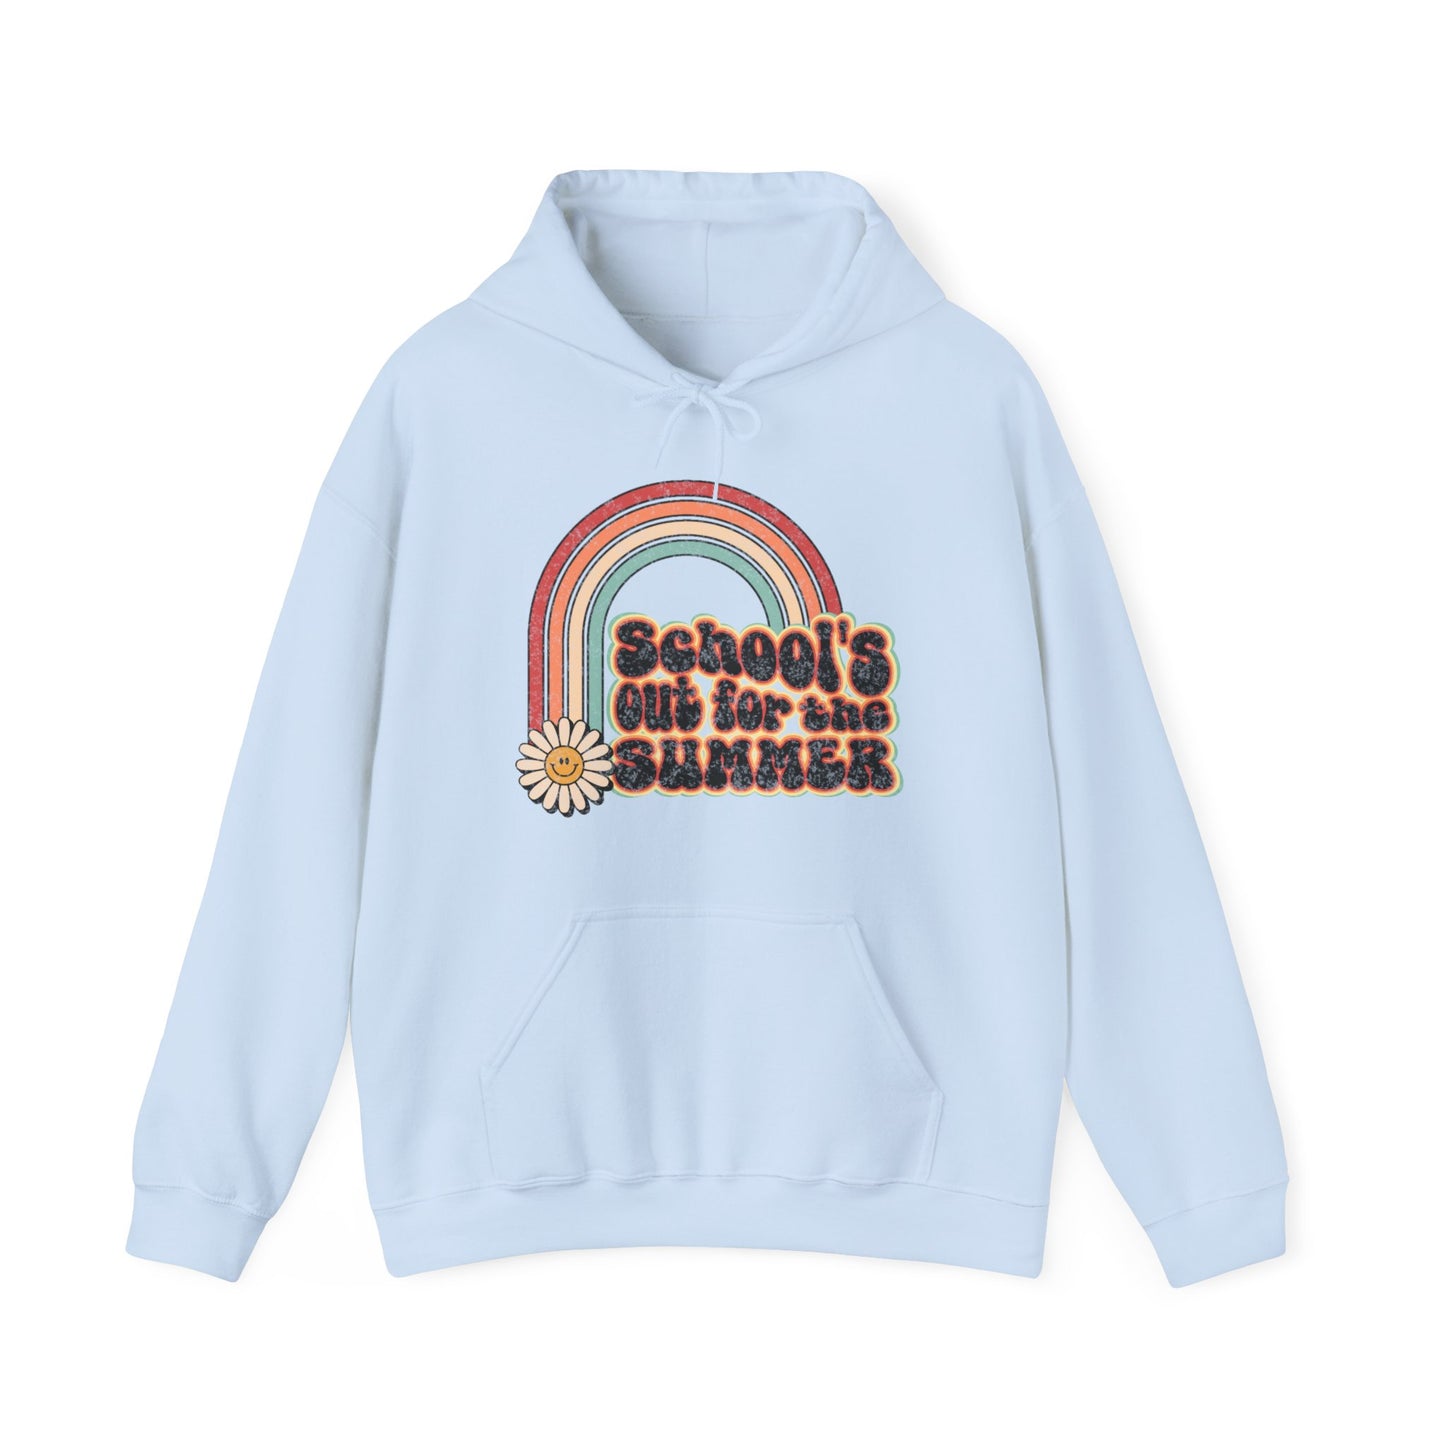 School’s out for the Summer - Unisex Heavy Blend™ Hooded Sweatshirt